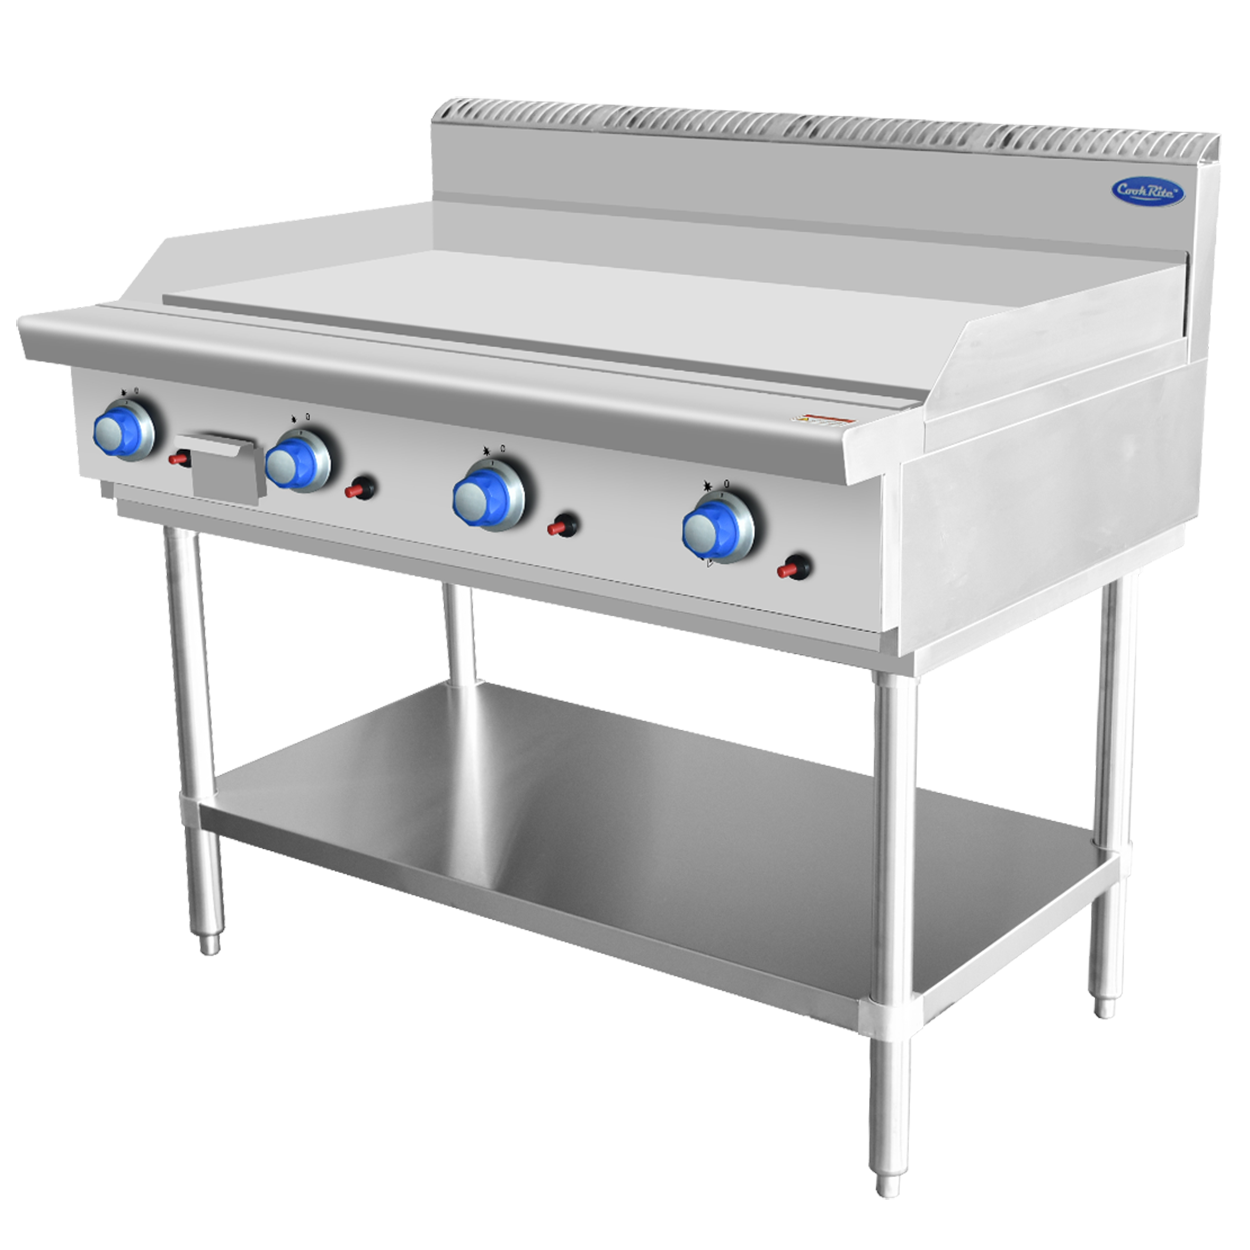 Cookrite large commercial hotplate